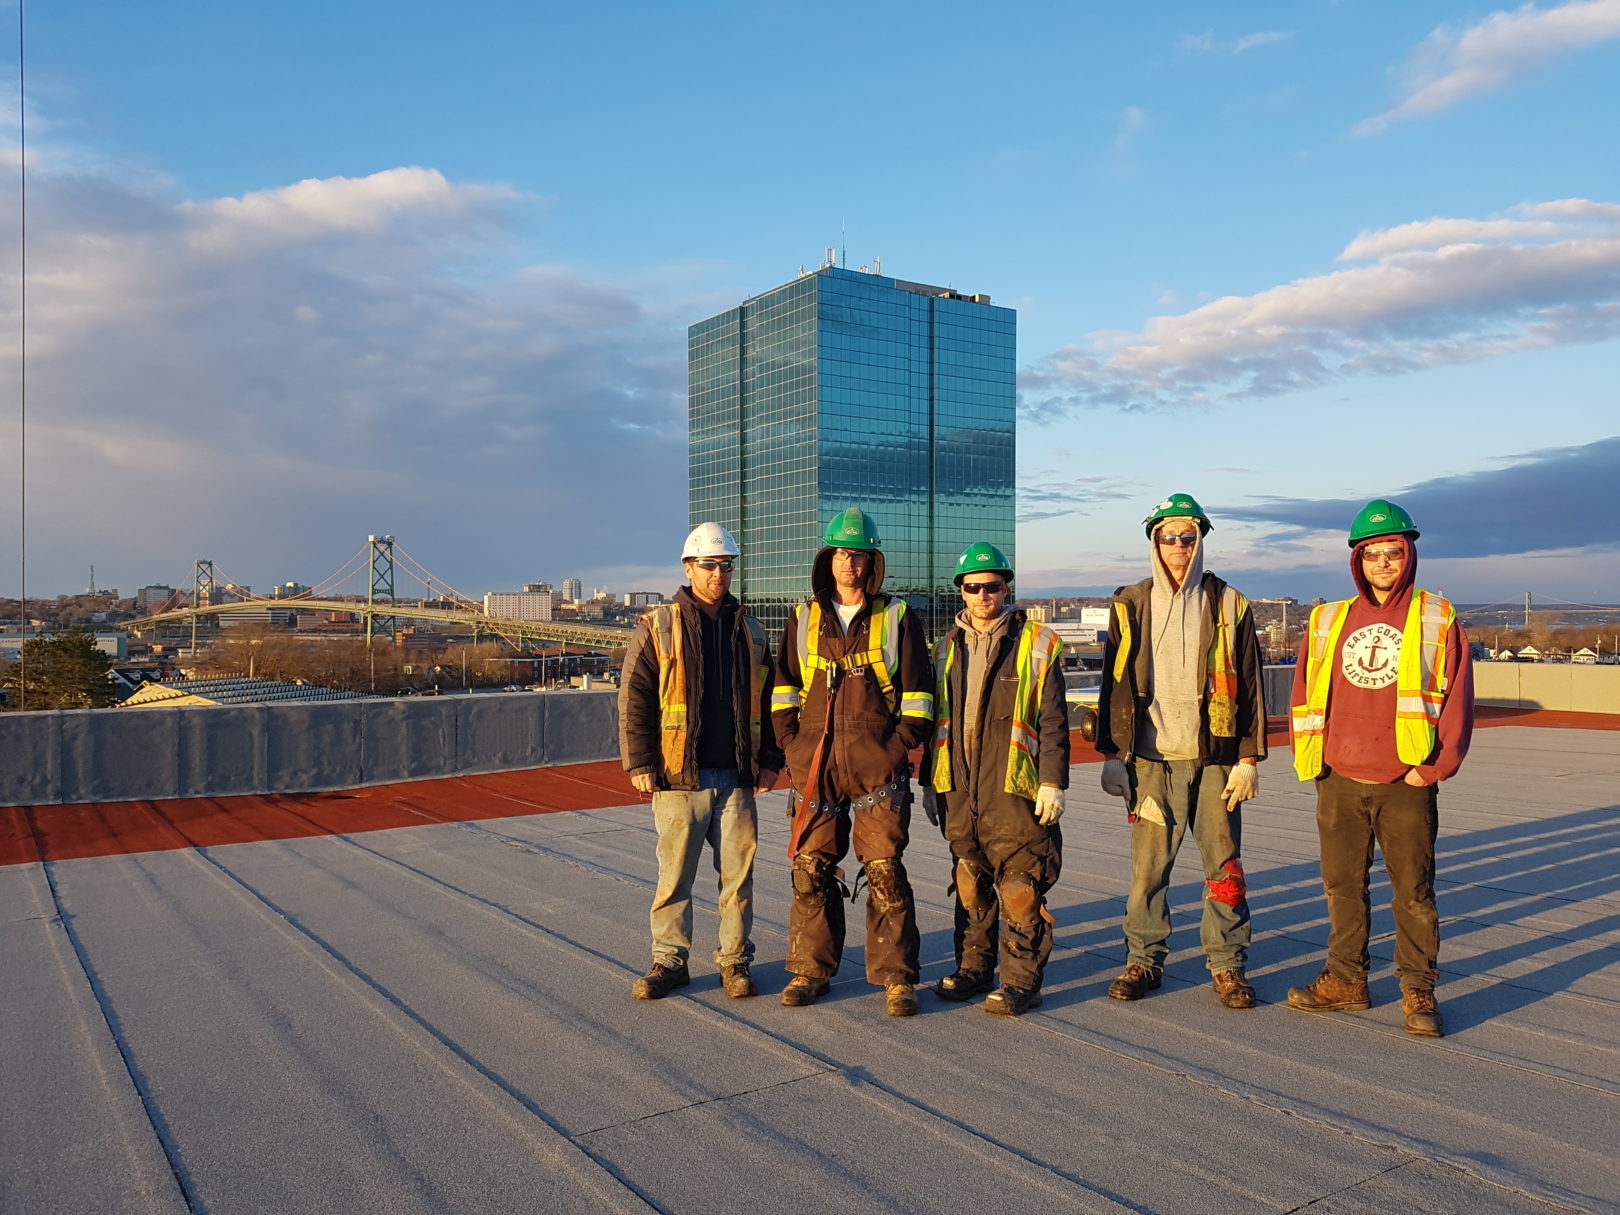 Flynn crew photo on roofing project